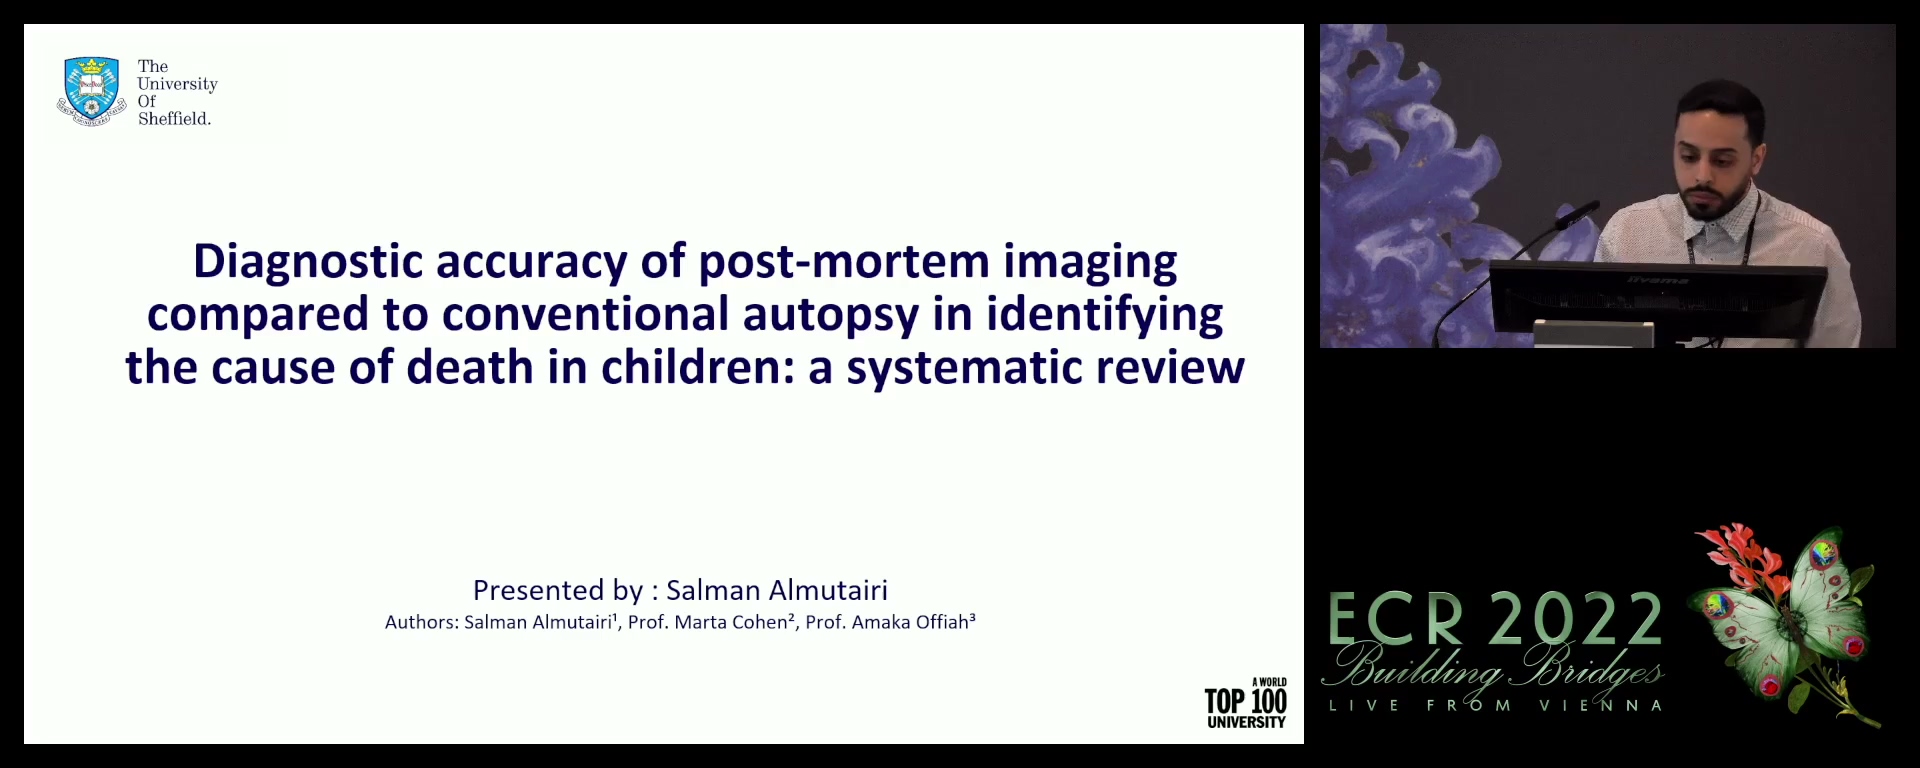 Diagnostic accuracy of post-mortem imaging compared to conventional autopsy in identifying the cause of death in children: a systematic review - Salman Almutairi, Sheffield / UK